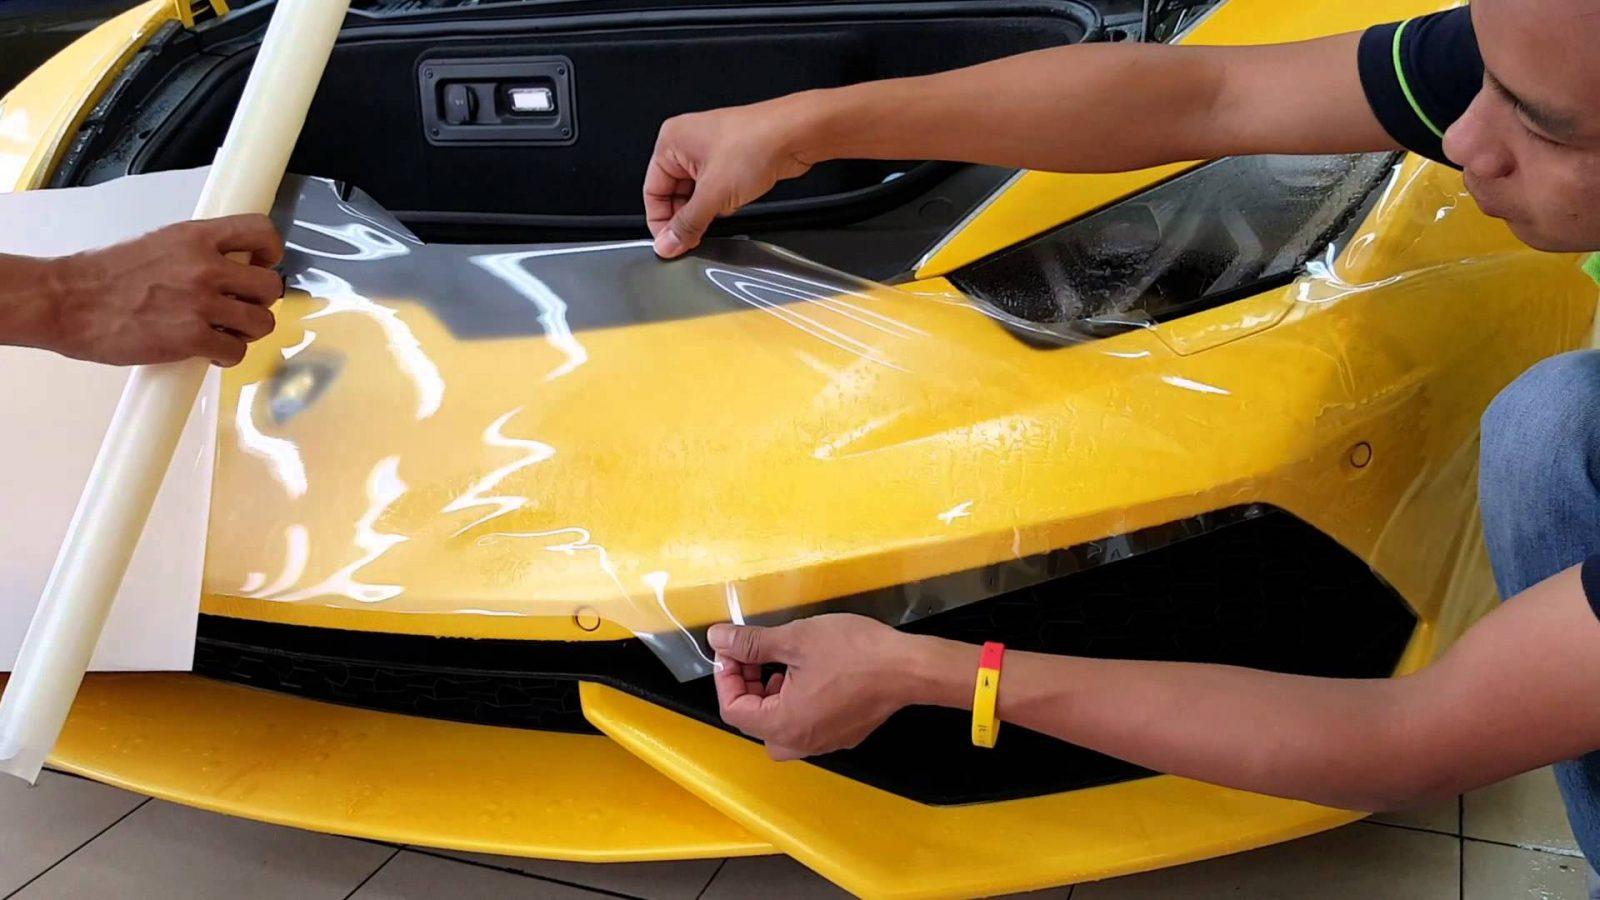 How To Protect Car Paint 5 Useful Ways To Follow!